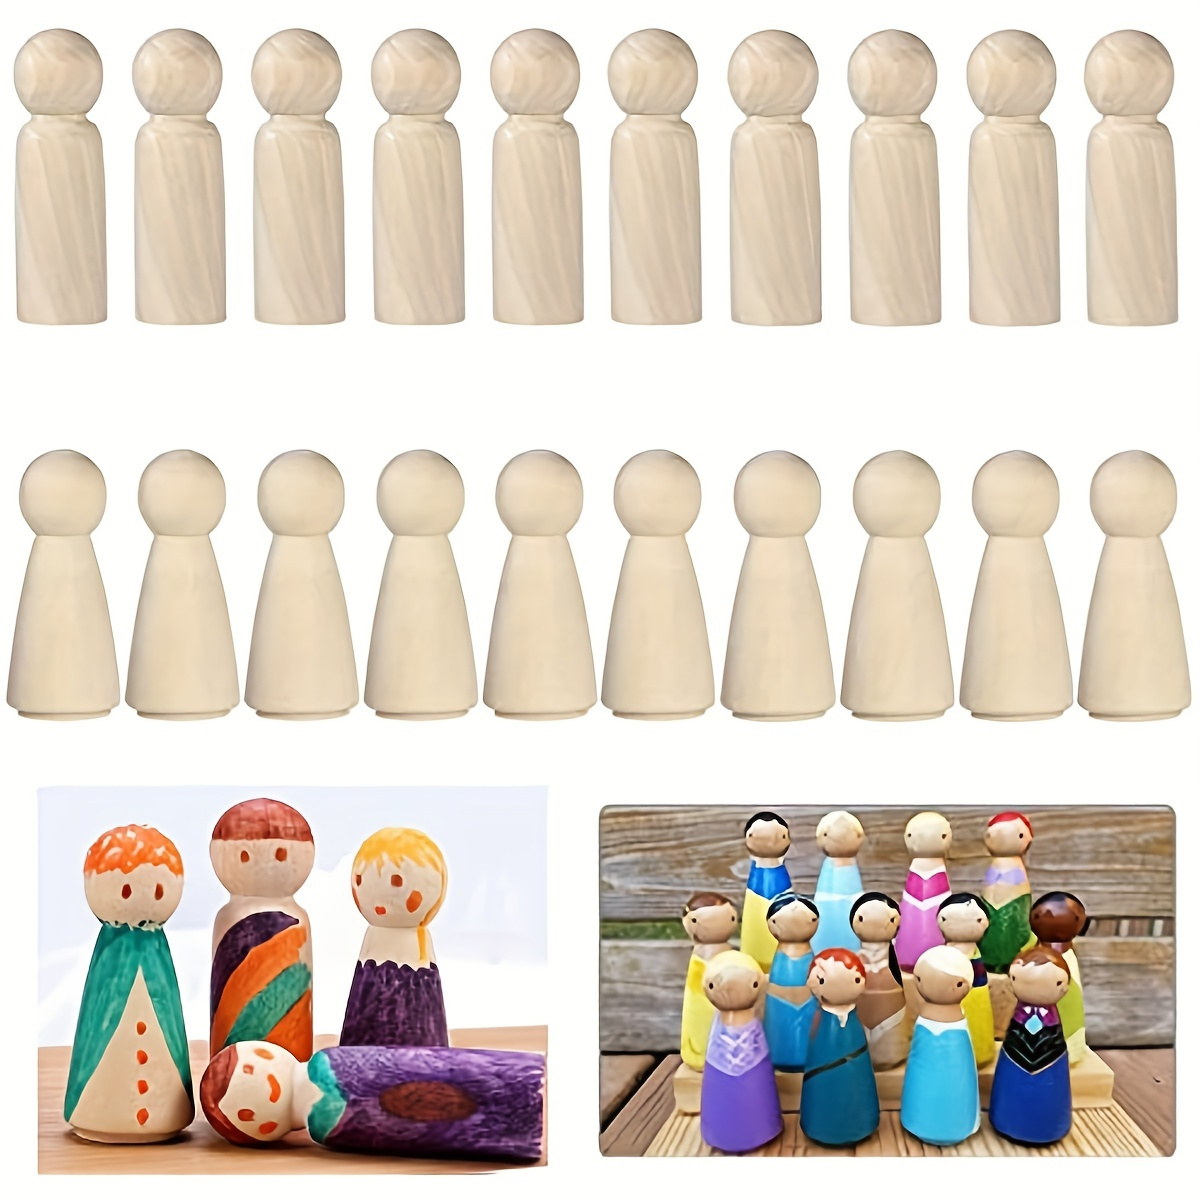 

20pcs Blank Wooden Peg Dolls, Peg Dolls, Diy Natural Wooden Doll Bodies For Arts And Crafts, Children Graffiti/doodle Drawing Tool